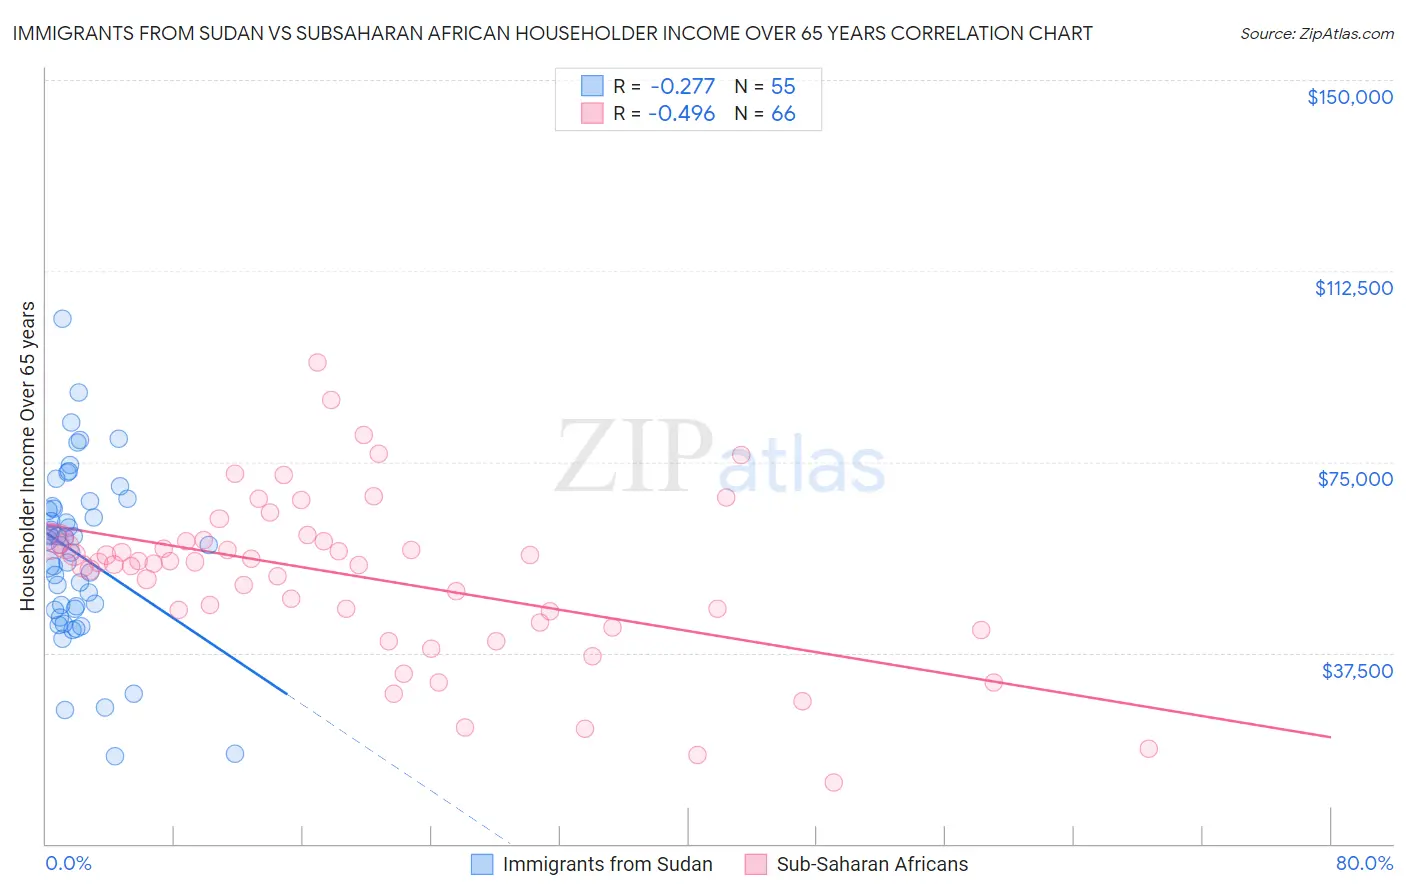 Immigrants from Sudan vs Subsaharan African Householder Income Over 65 years